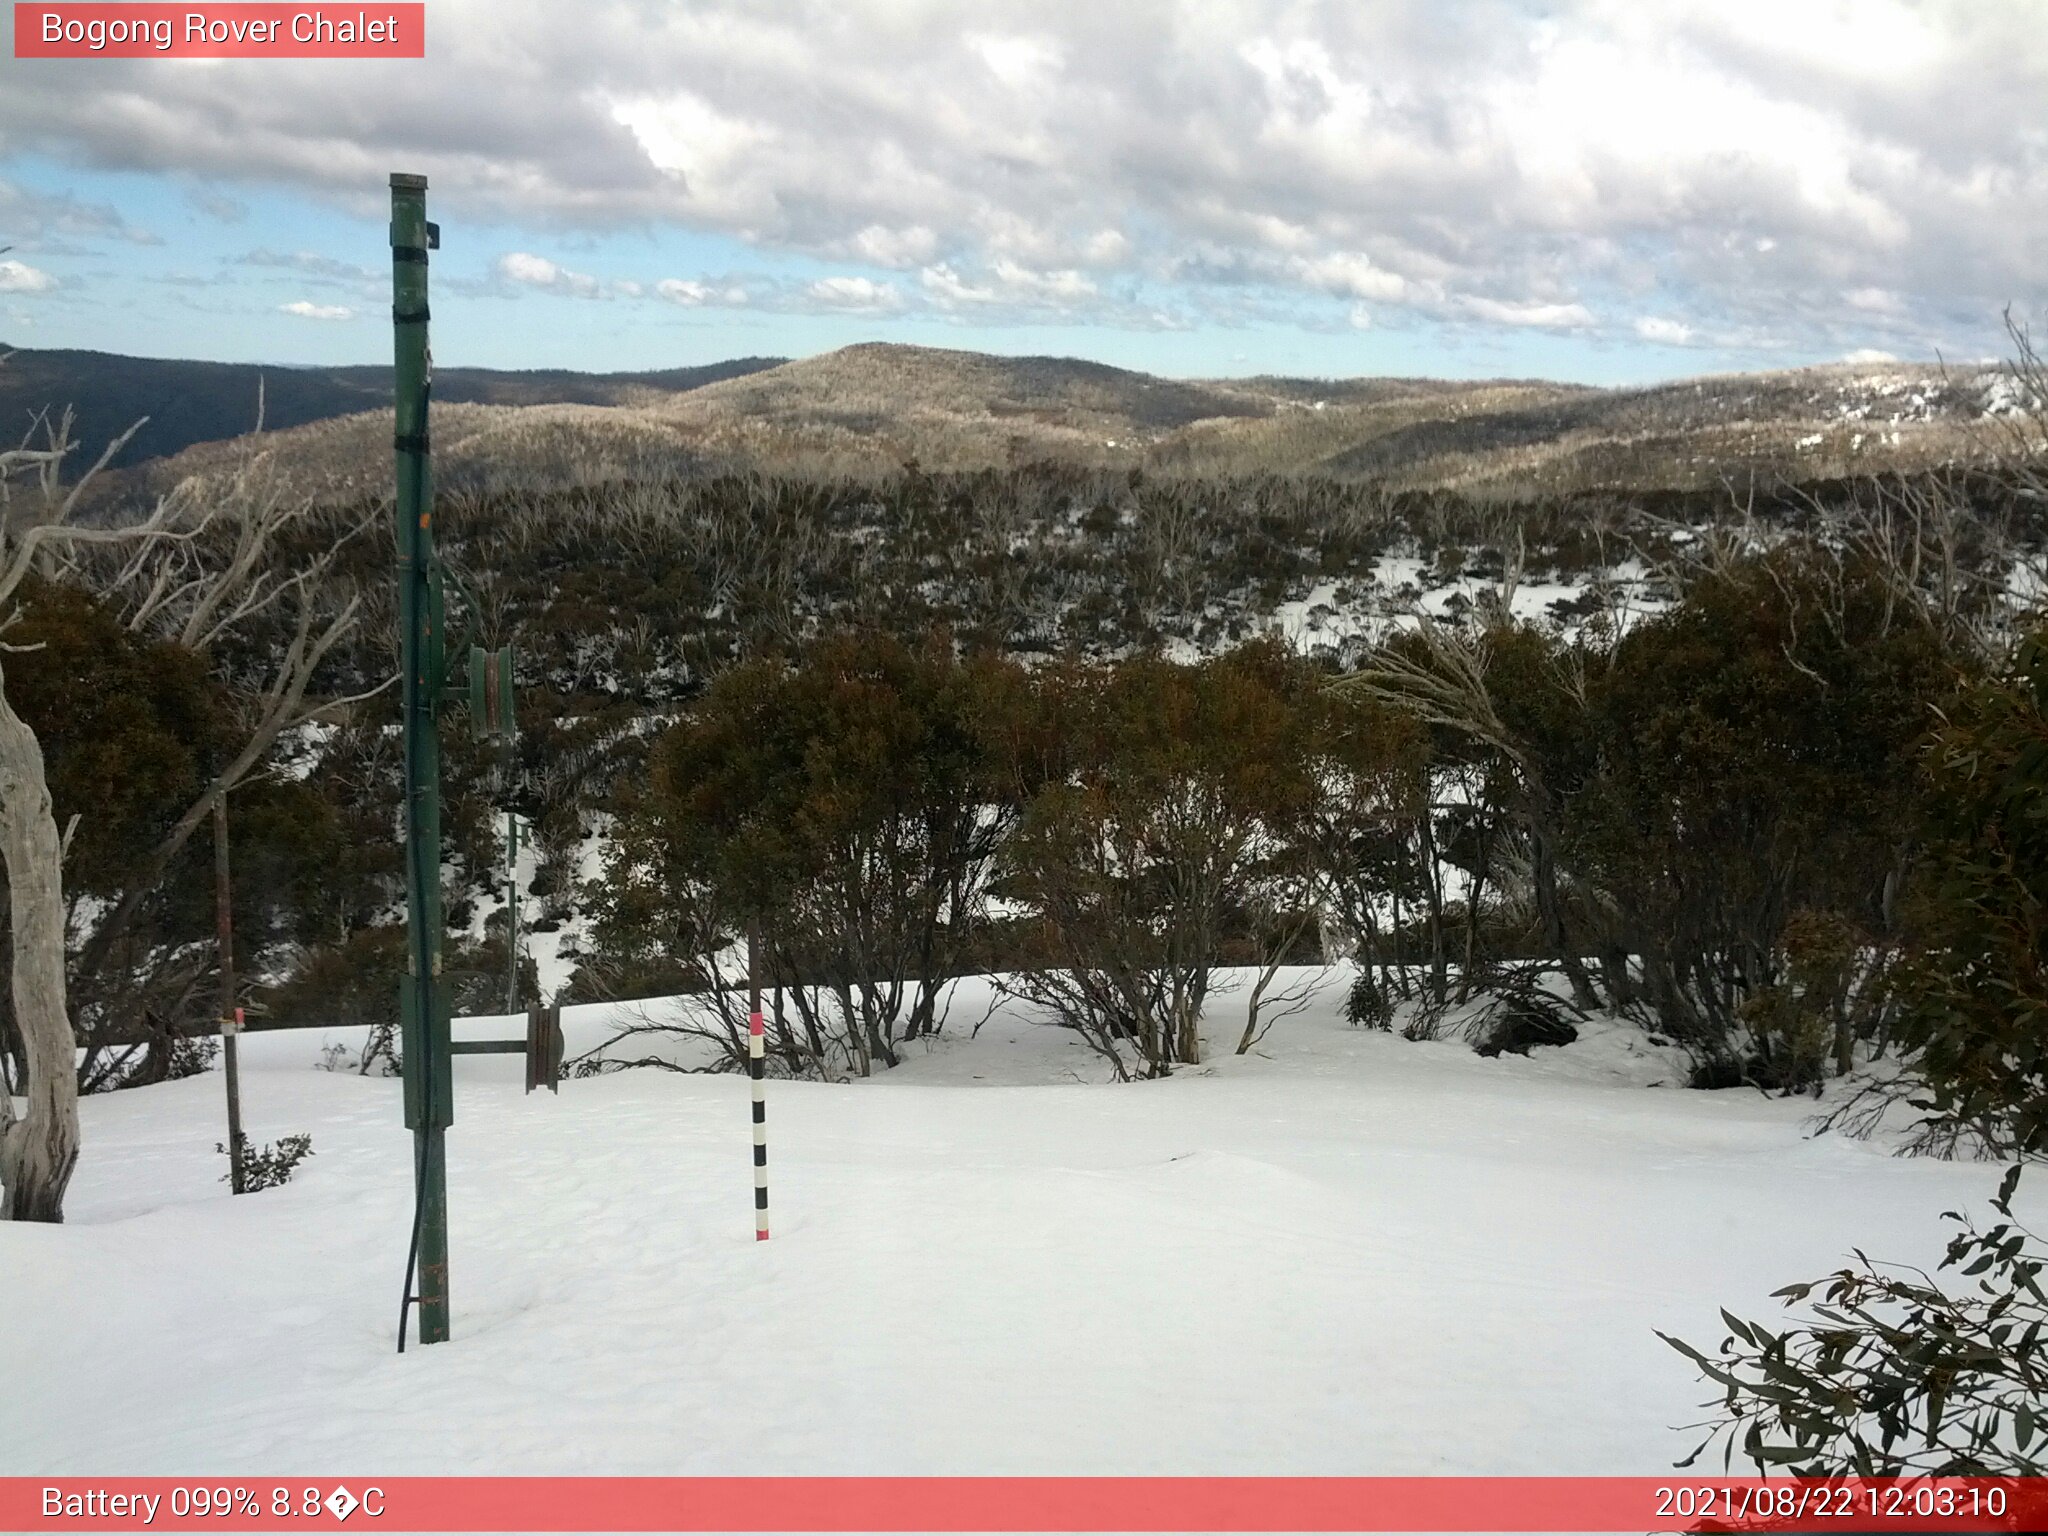 Bogong Web Cam 12:03pm Sunday 22nd of August 2021